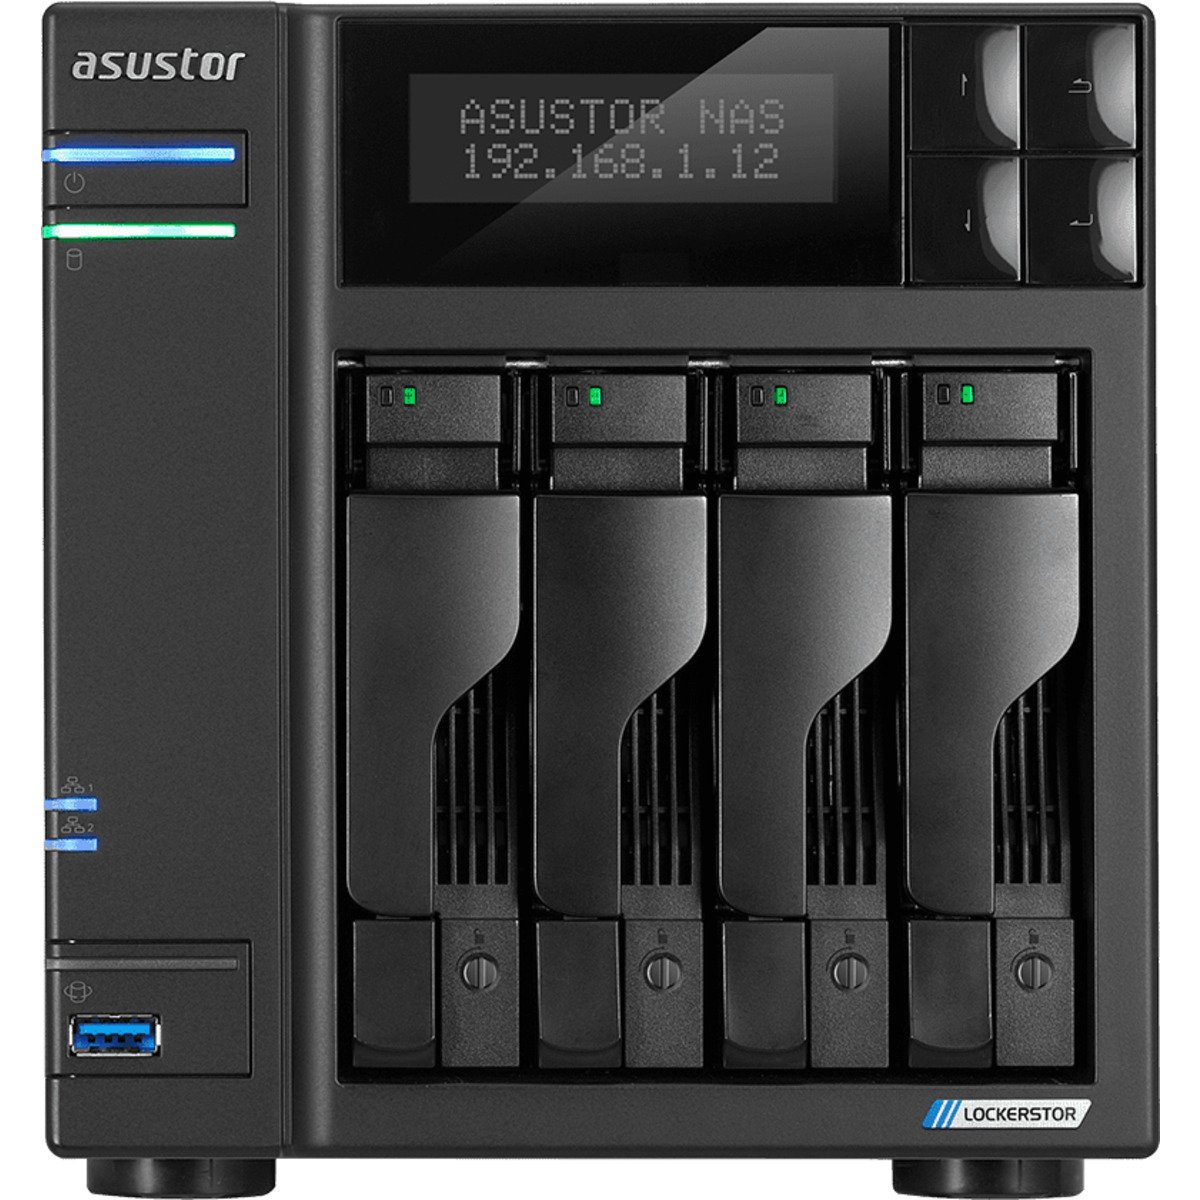 ASUSTOR AS6604T Lockerstor 4 30tb 4-Bay Desktop Multimedia / Power User / Business NAS - Network Attached Storage Device 3x10tb Seagate IronWolf Pro ST10000NT001 3.5 7200rpm SATA 6Gb/s HDD NAS Class Drives Installed - Burn-In Tested - ON SALE - FREE RAM UPGRADE AS6604T Lockerstor 4